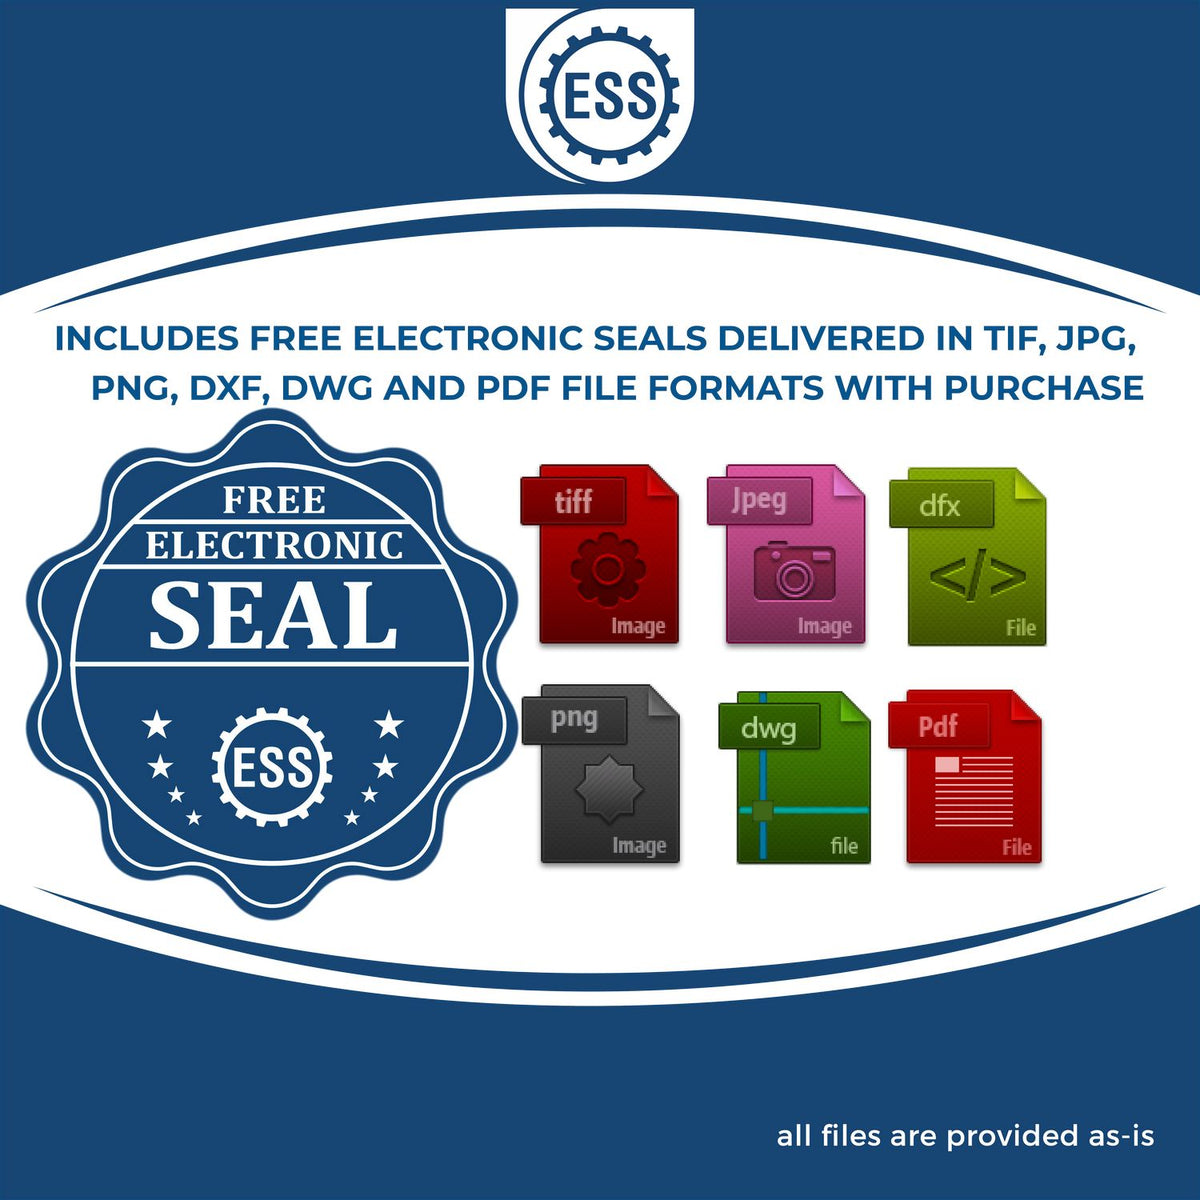 An infographic for the free electronic seal for the Hybrid Texas Land Surveyor Seal illustrating the different file type icons such as DXF, DWG, TIF, JPG and PNG.